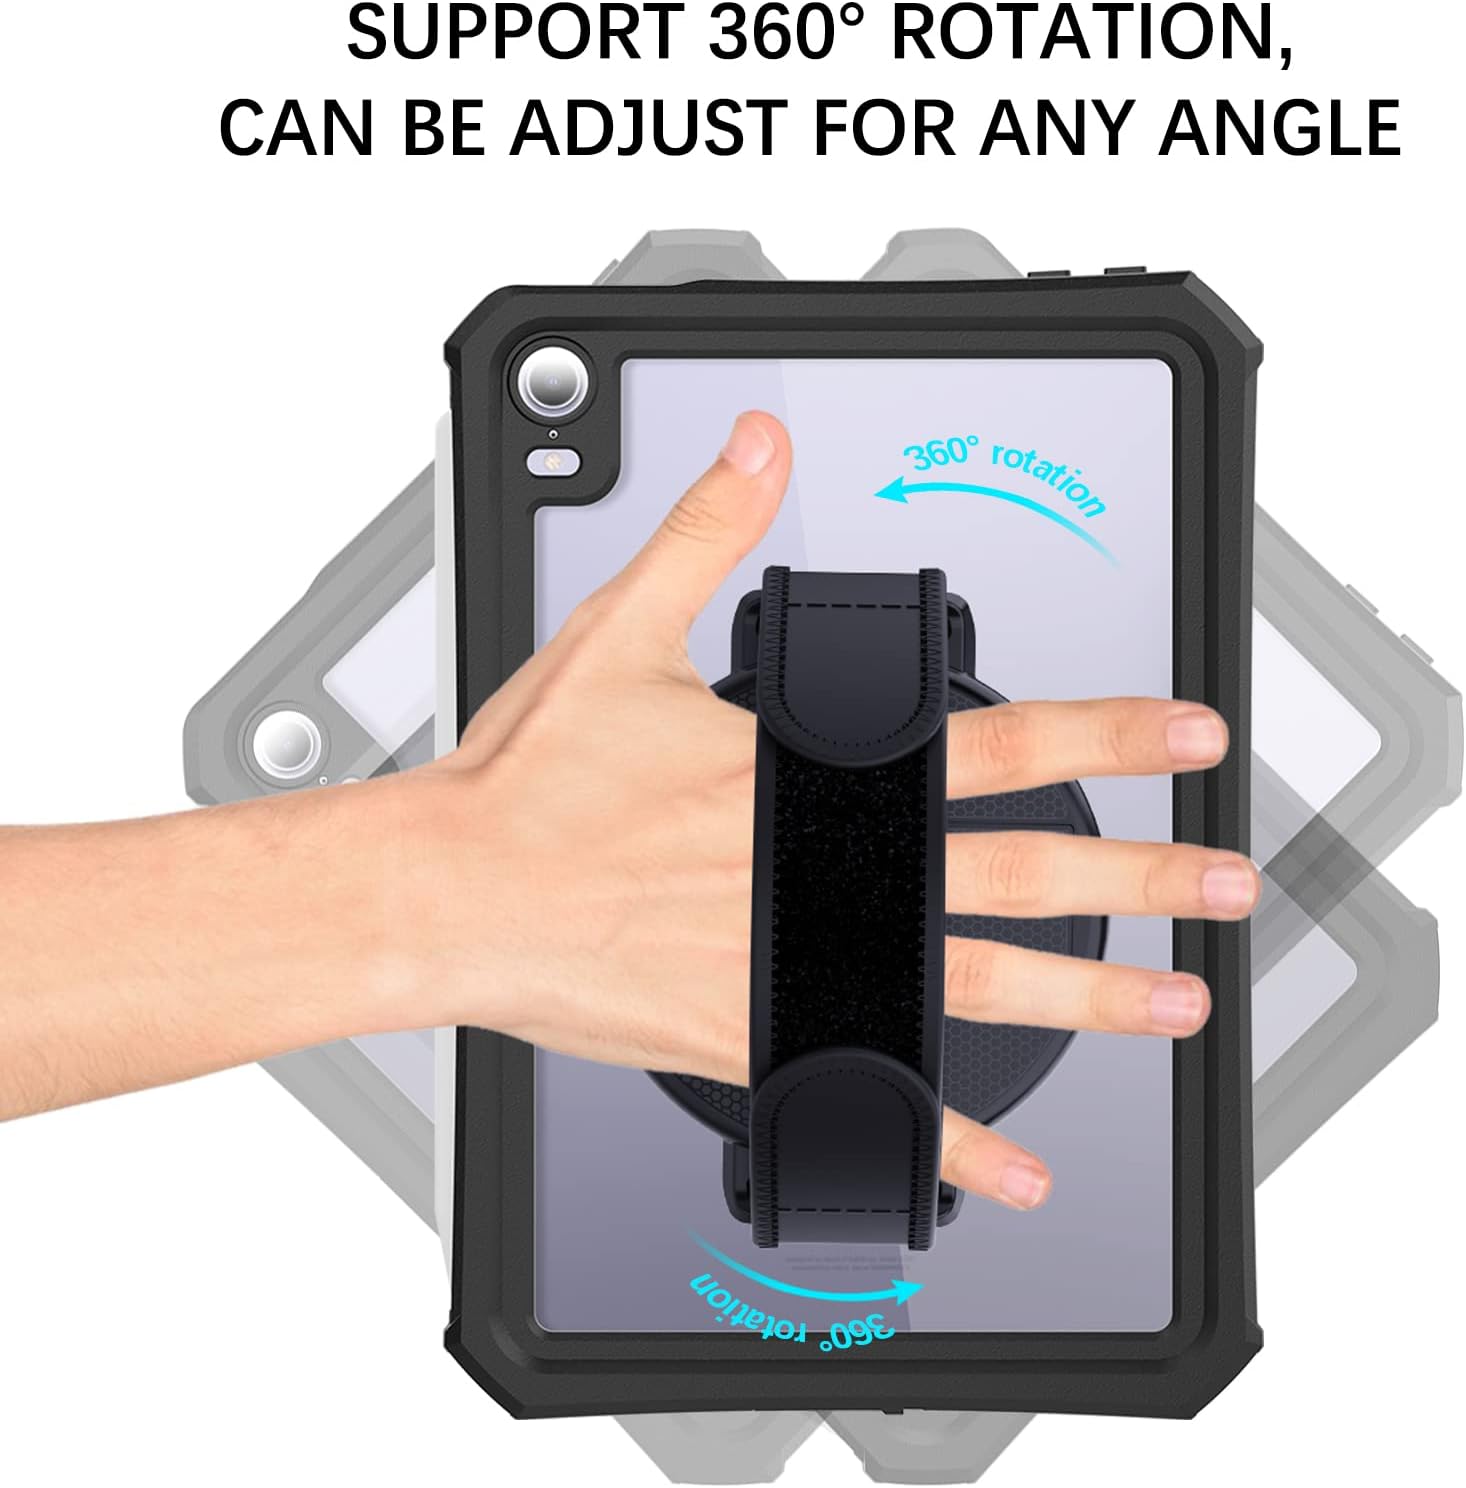 Adhesive Tablet Stand, 360 Degree Rotating Sticky Tablet Stand, Multi-Angle Adjustable Tablet Stand with Hand Strap, Compatible with iPad Pro 11/12.9, Air, Samsung Galaxy Tabs, 9.7-13 Tablets